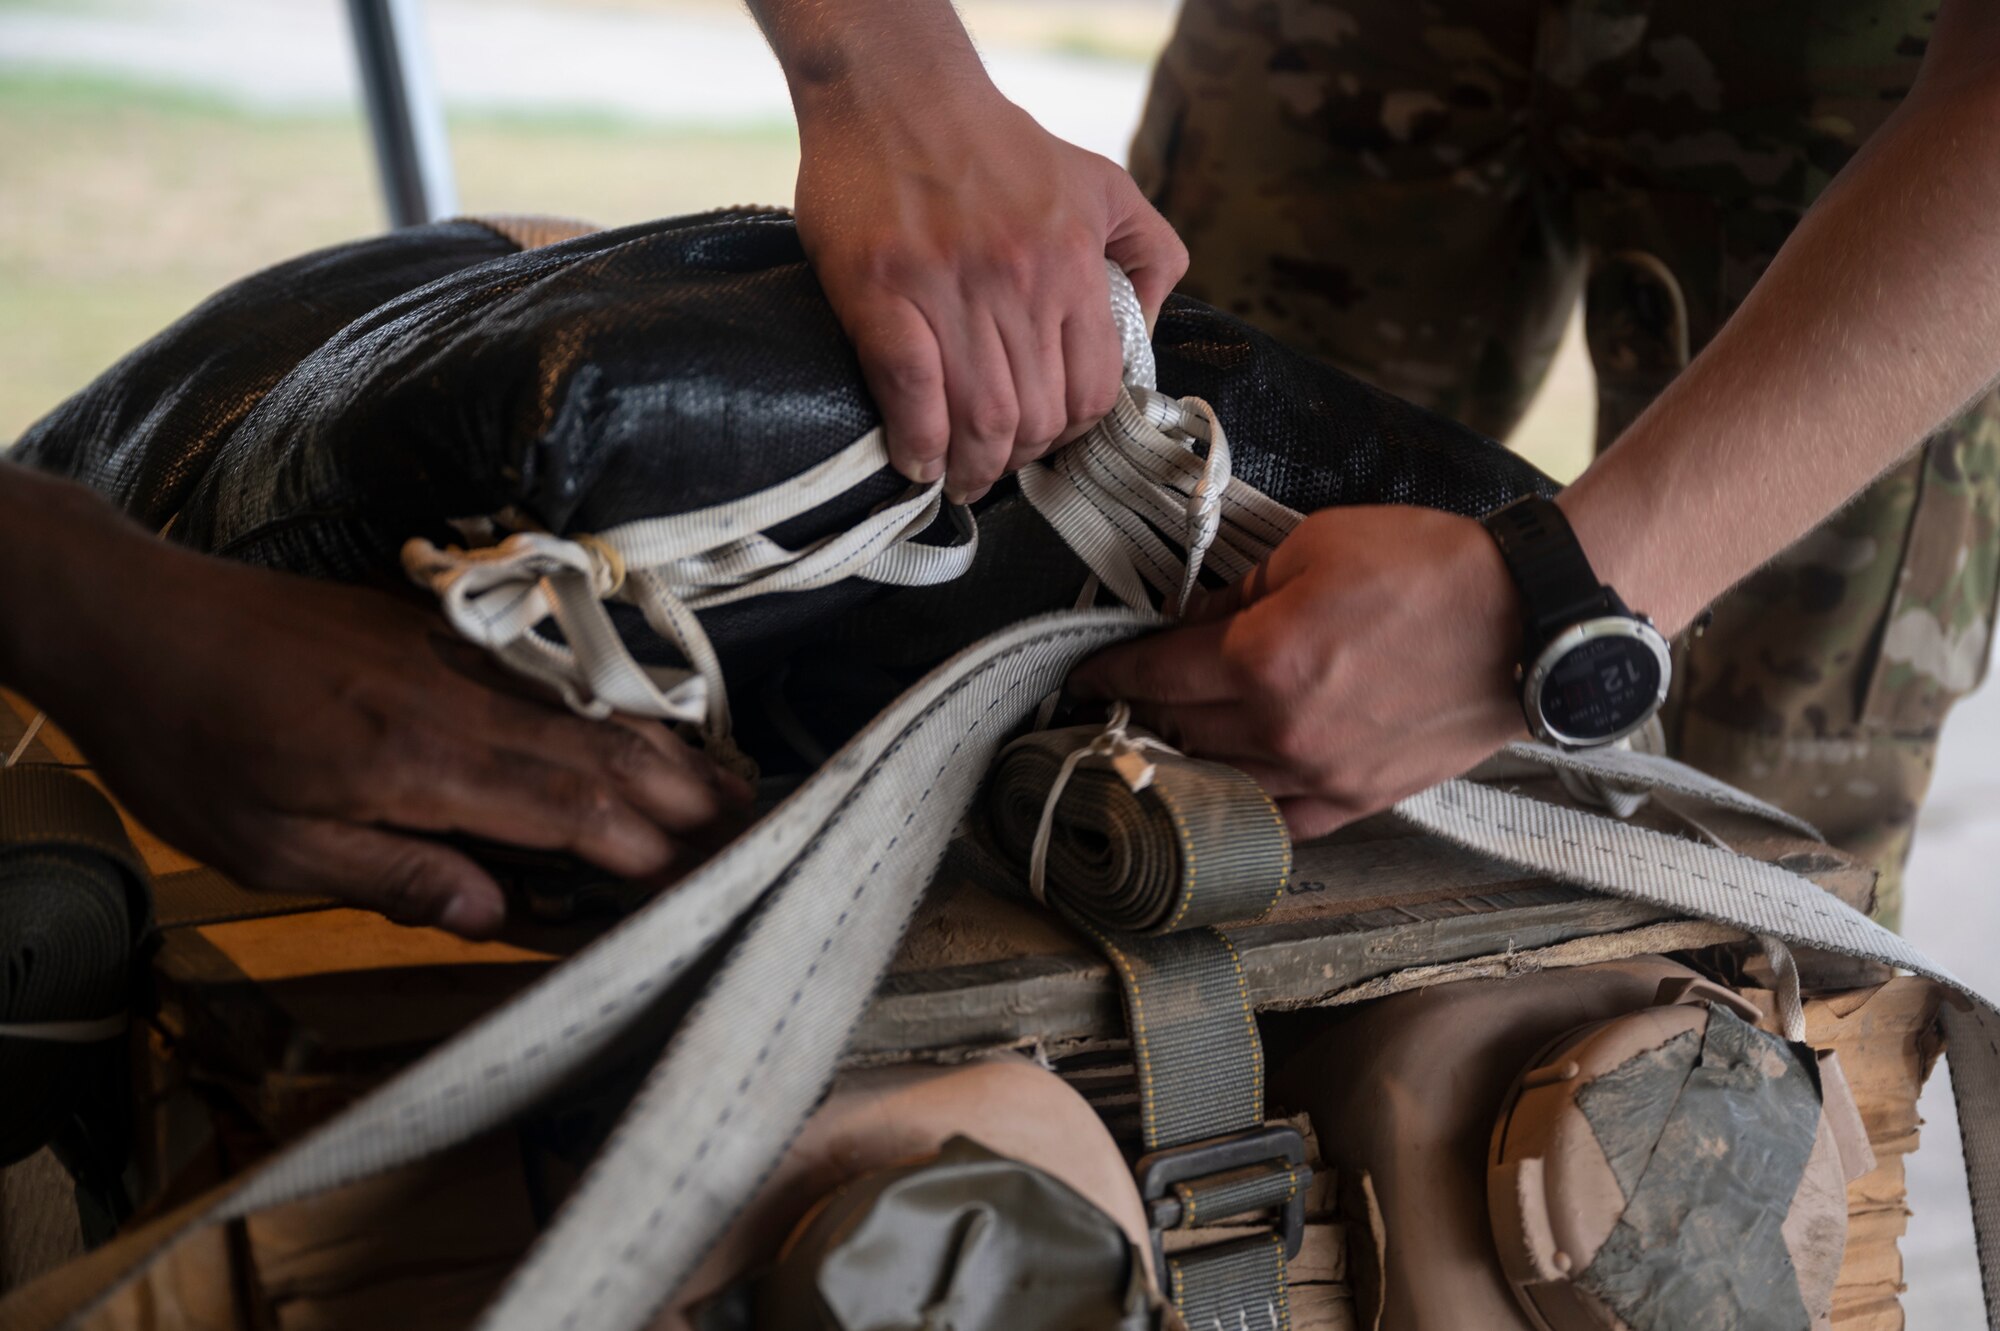 Two U.S. Air Force loadmasters assigned to the 37th Airlift Squadron secure cargo on a C-130J Super Hercules aircraft during exercise Agile Spirit 21